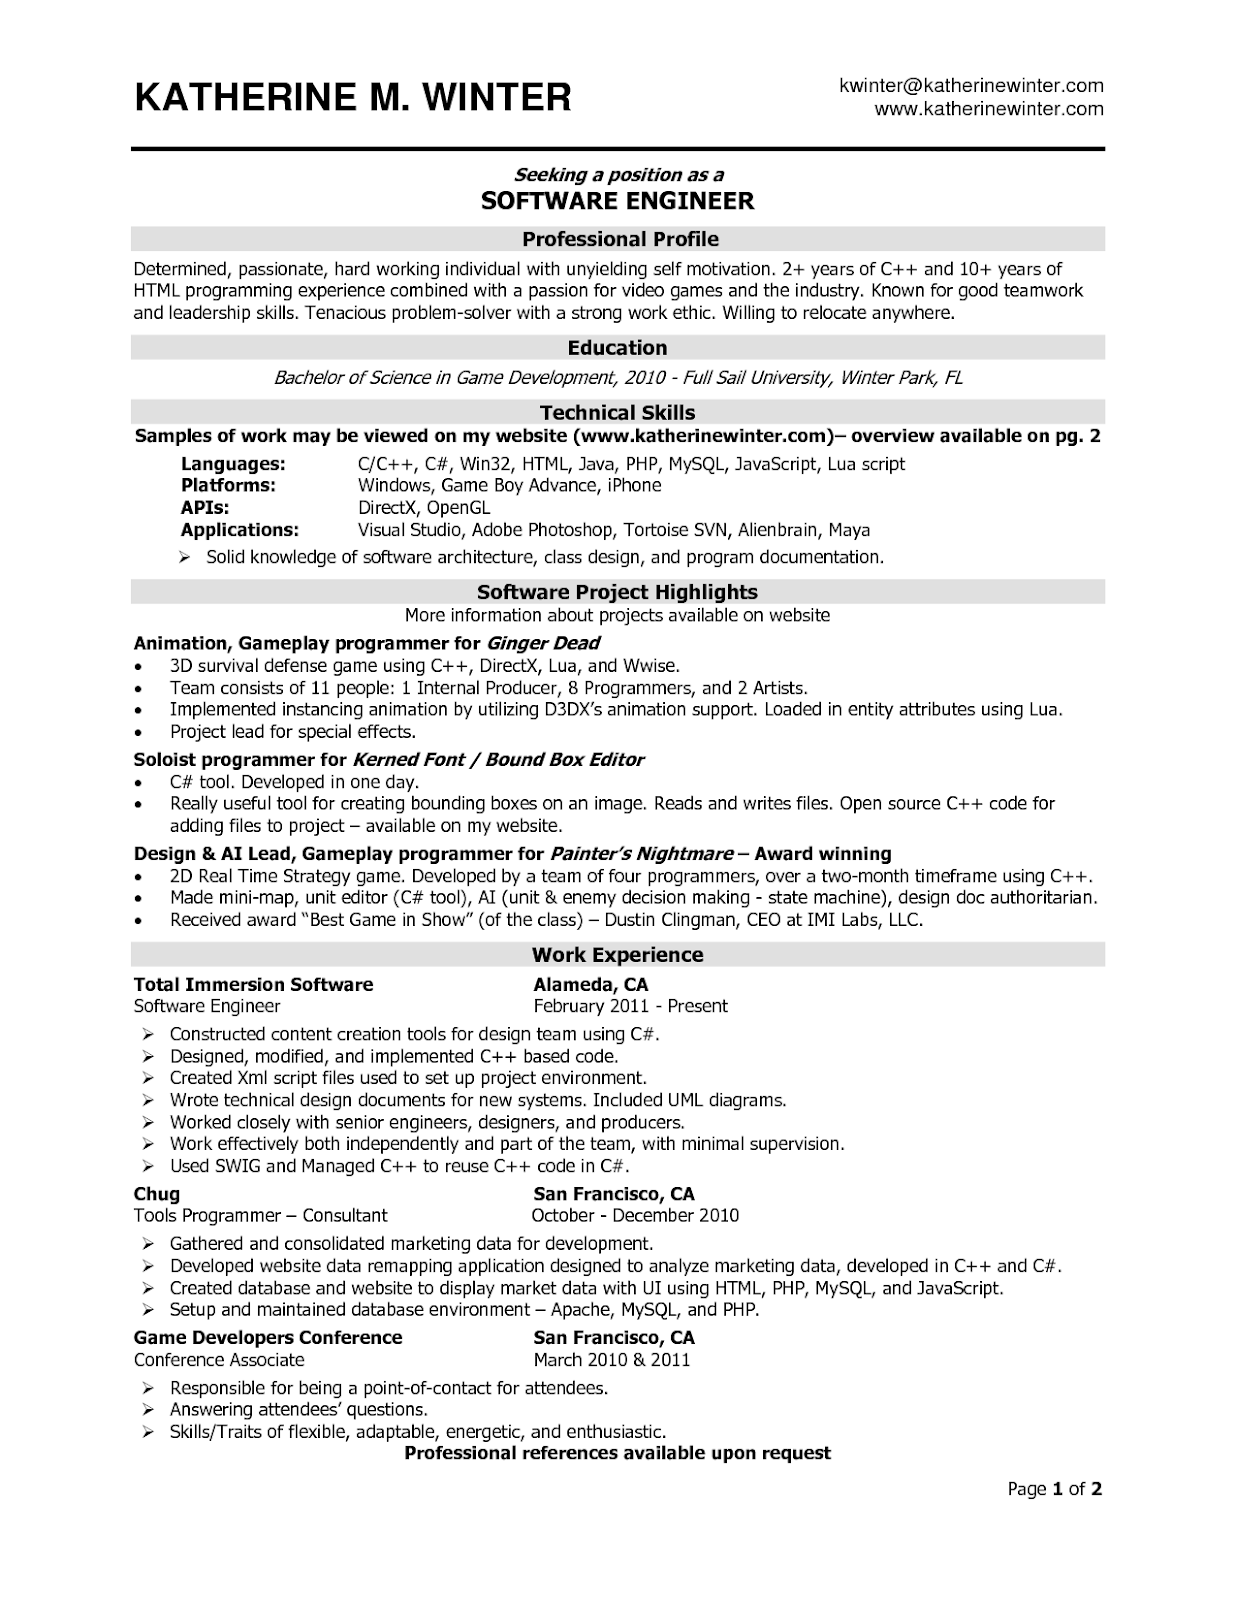 Resume formate for software testing